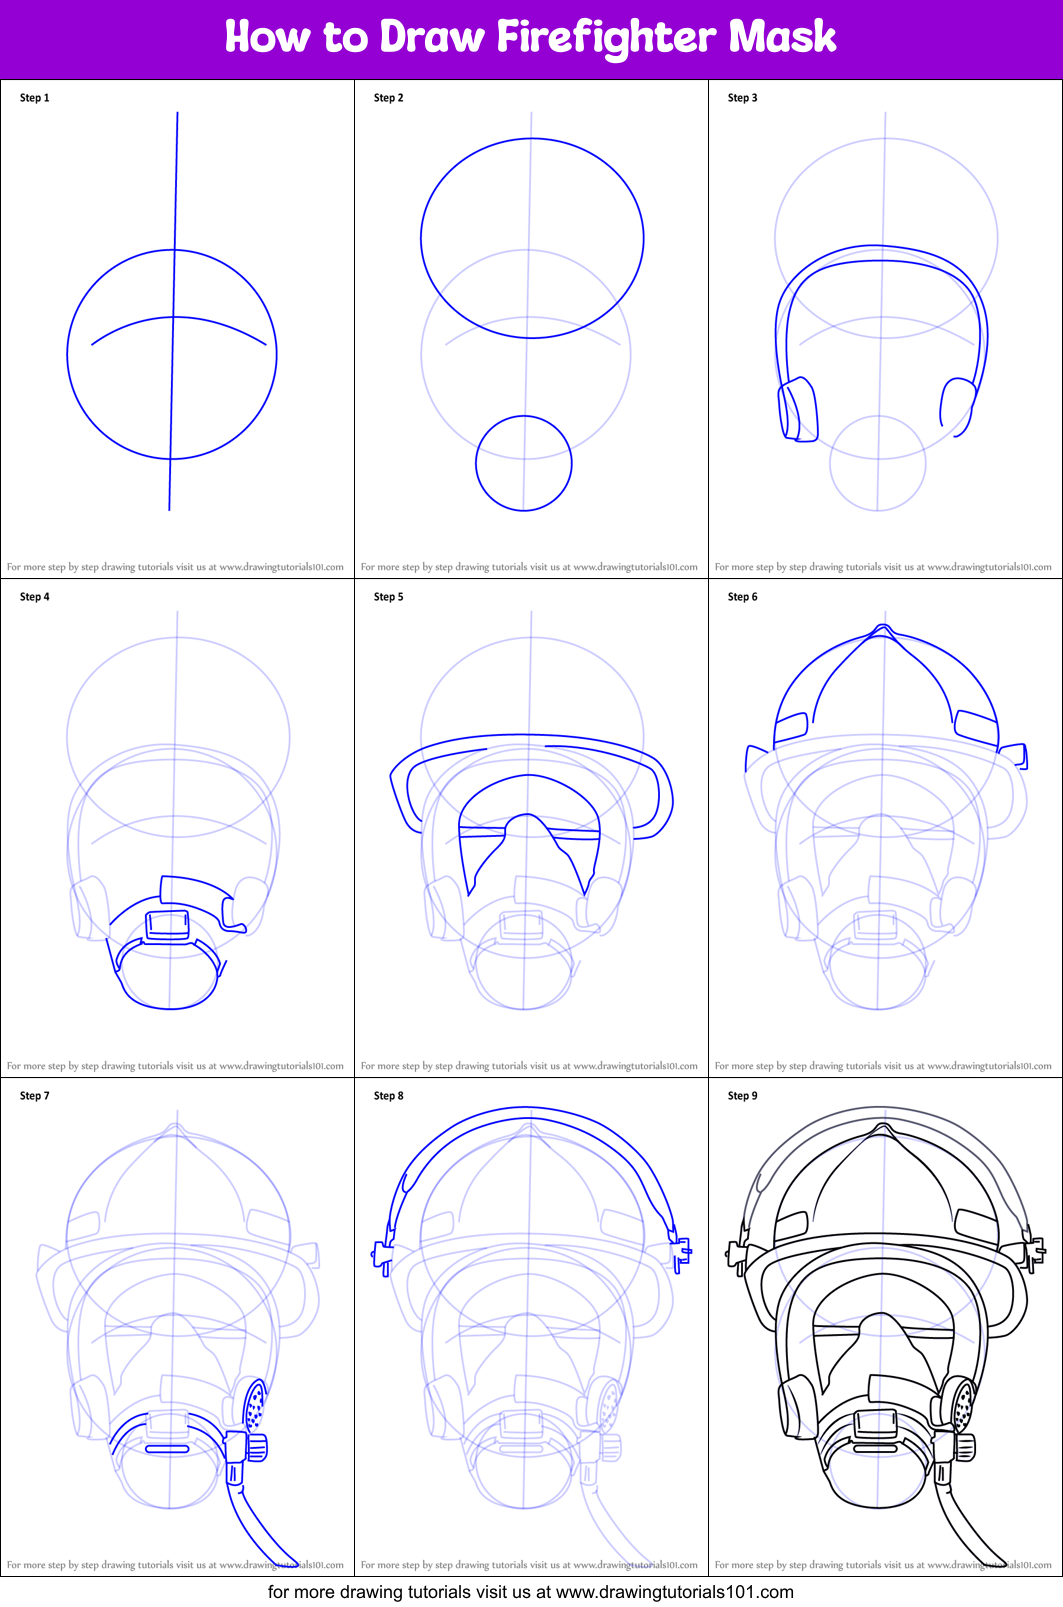 How To Draw Firefighter Mask Printable Step By Step Drawing Sheet Drawingtutorials101 Com - roblox firefighter mask